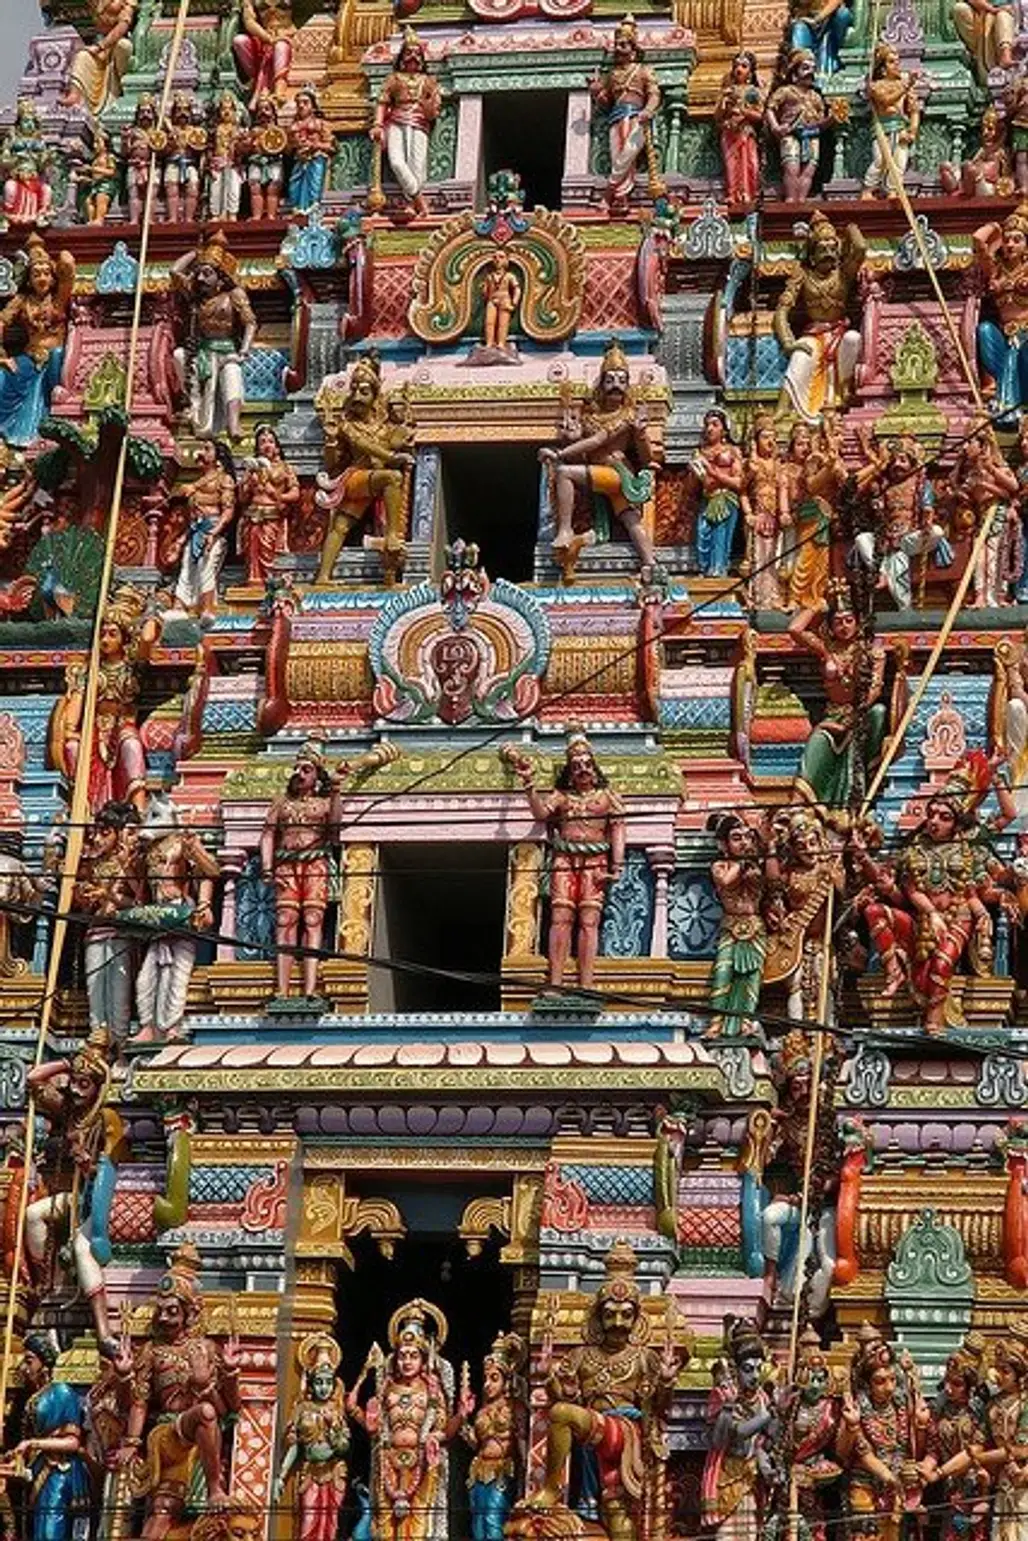 View the Artistry of a Hindu Temple